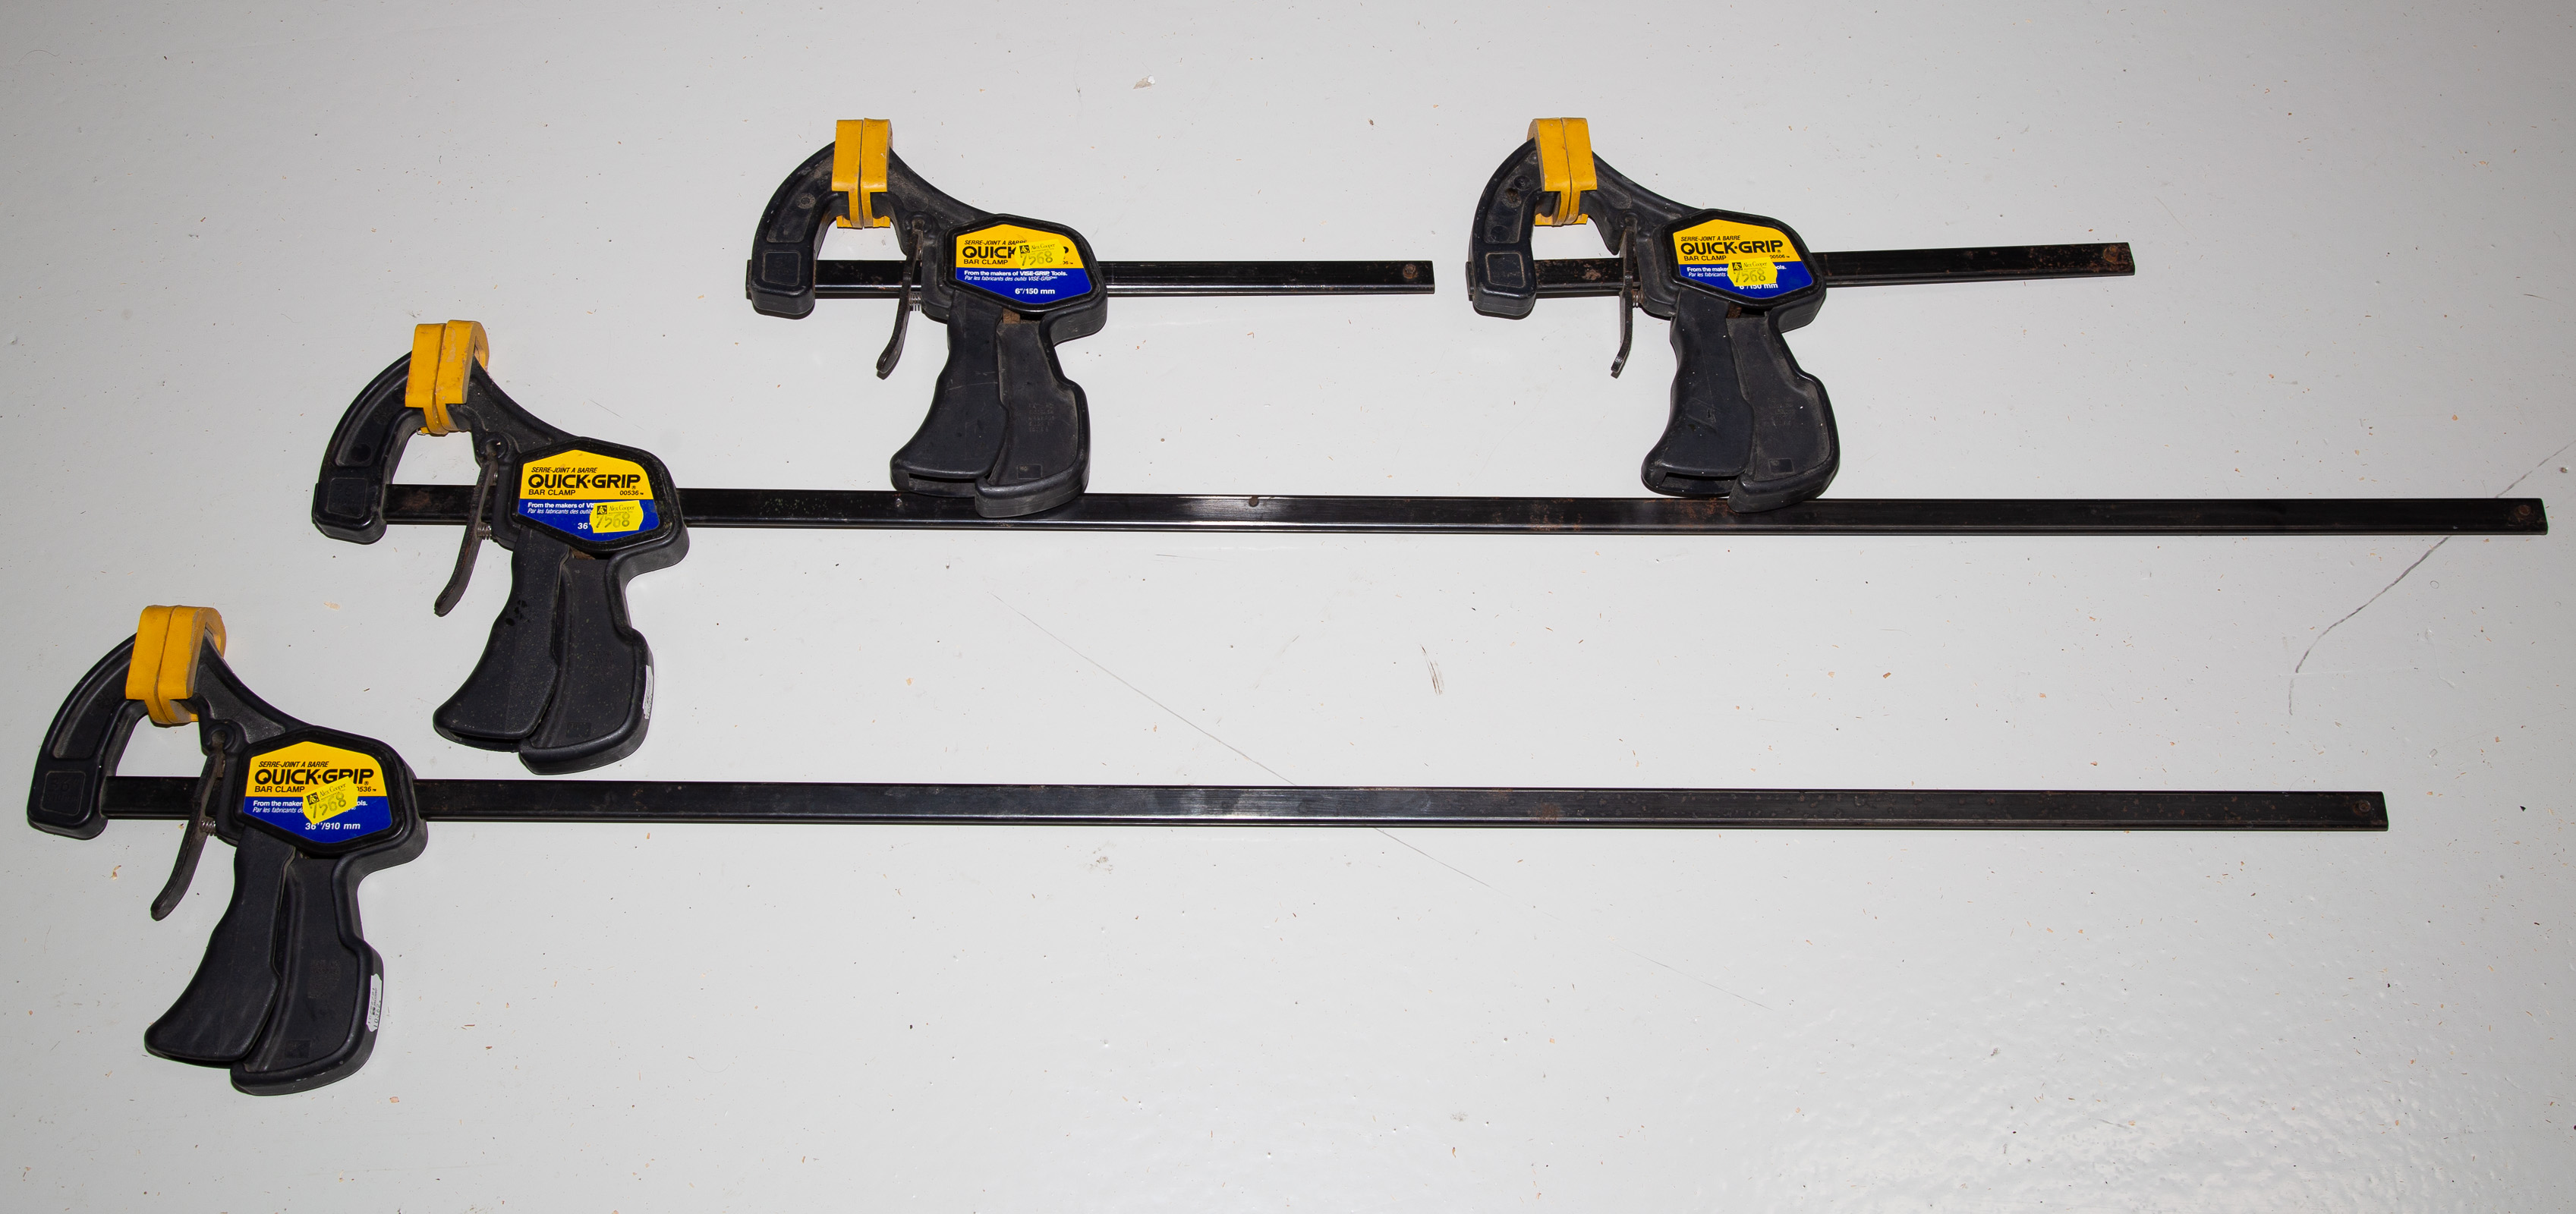 FOUR QUICK GRIP BAR CLAMPS Including